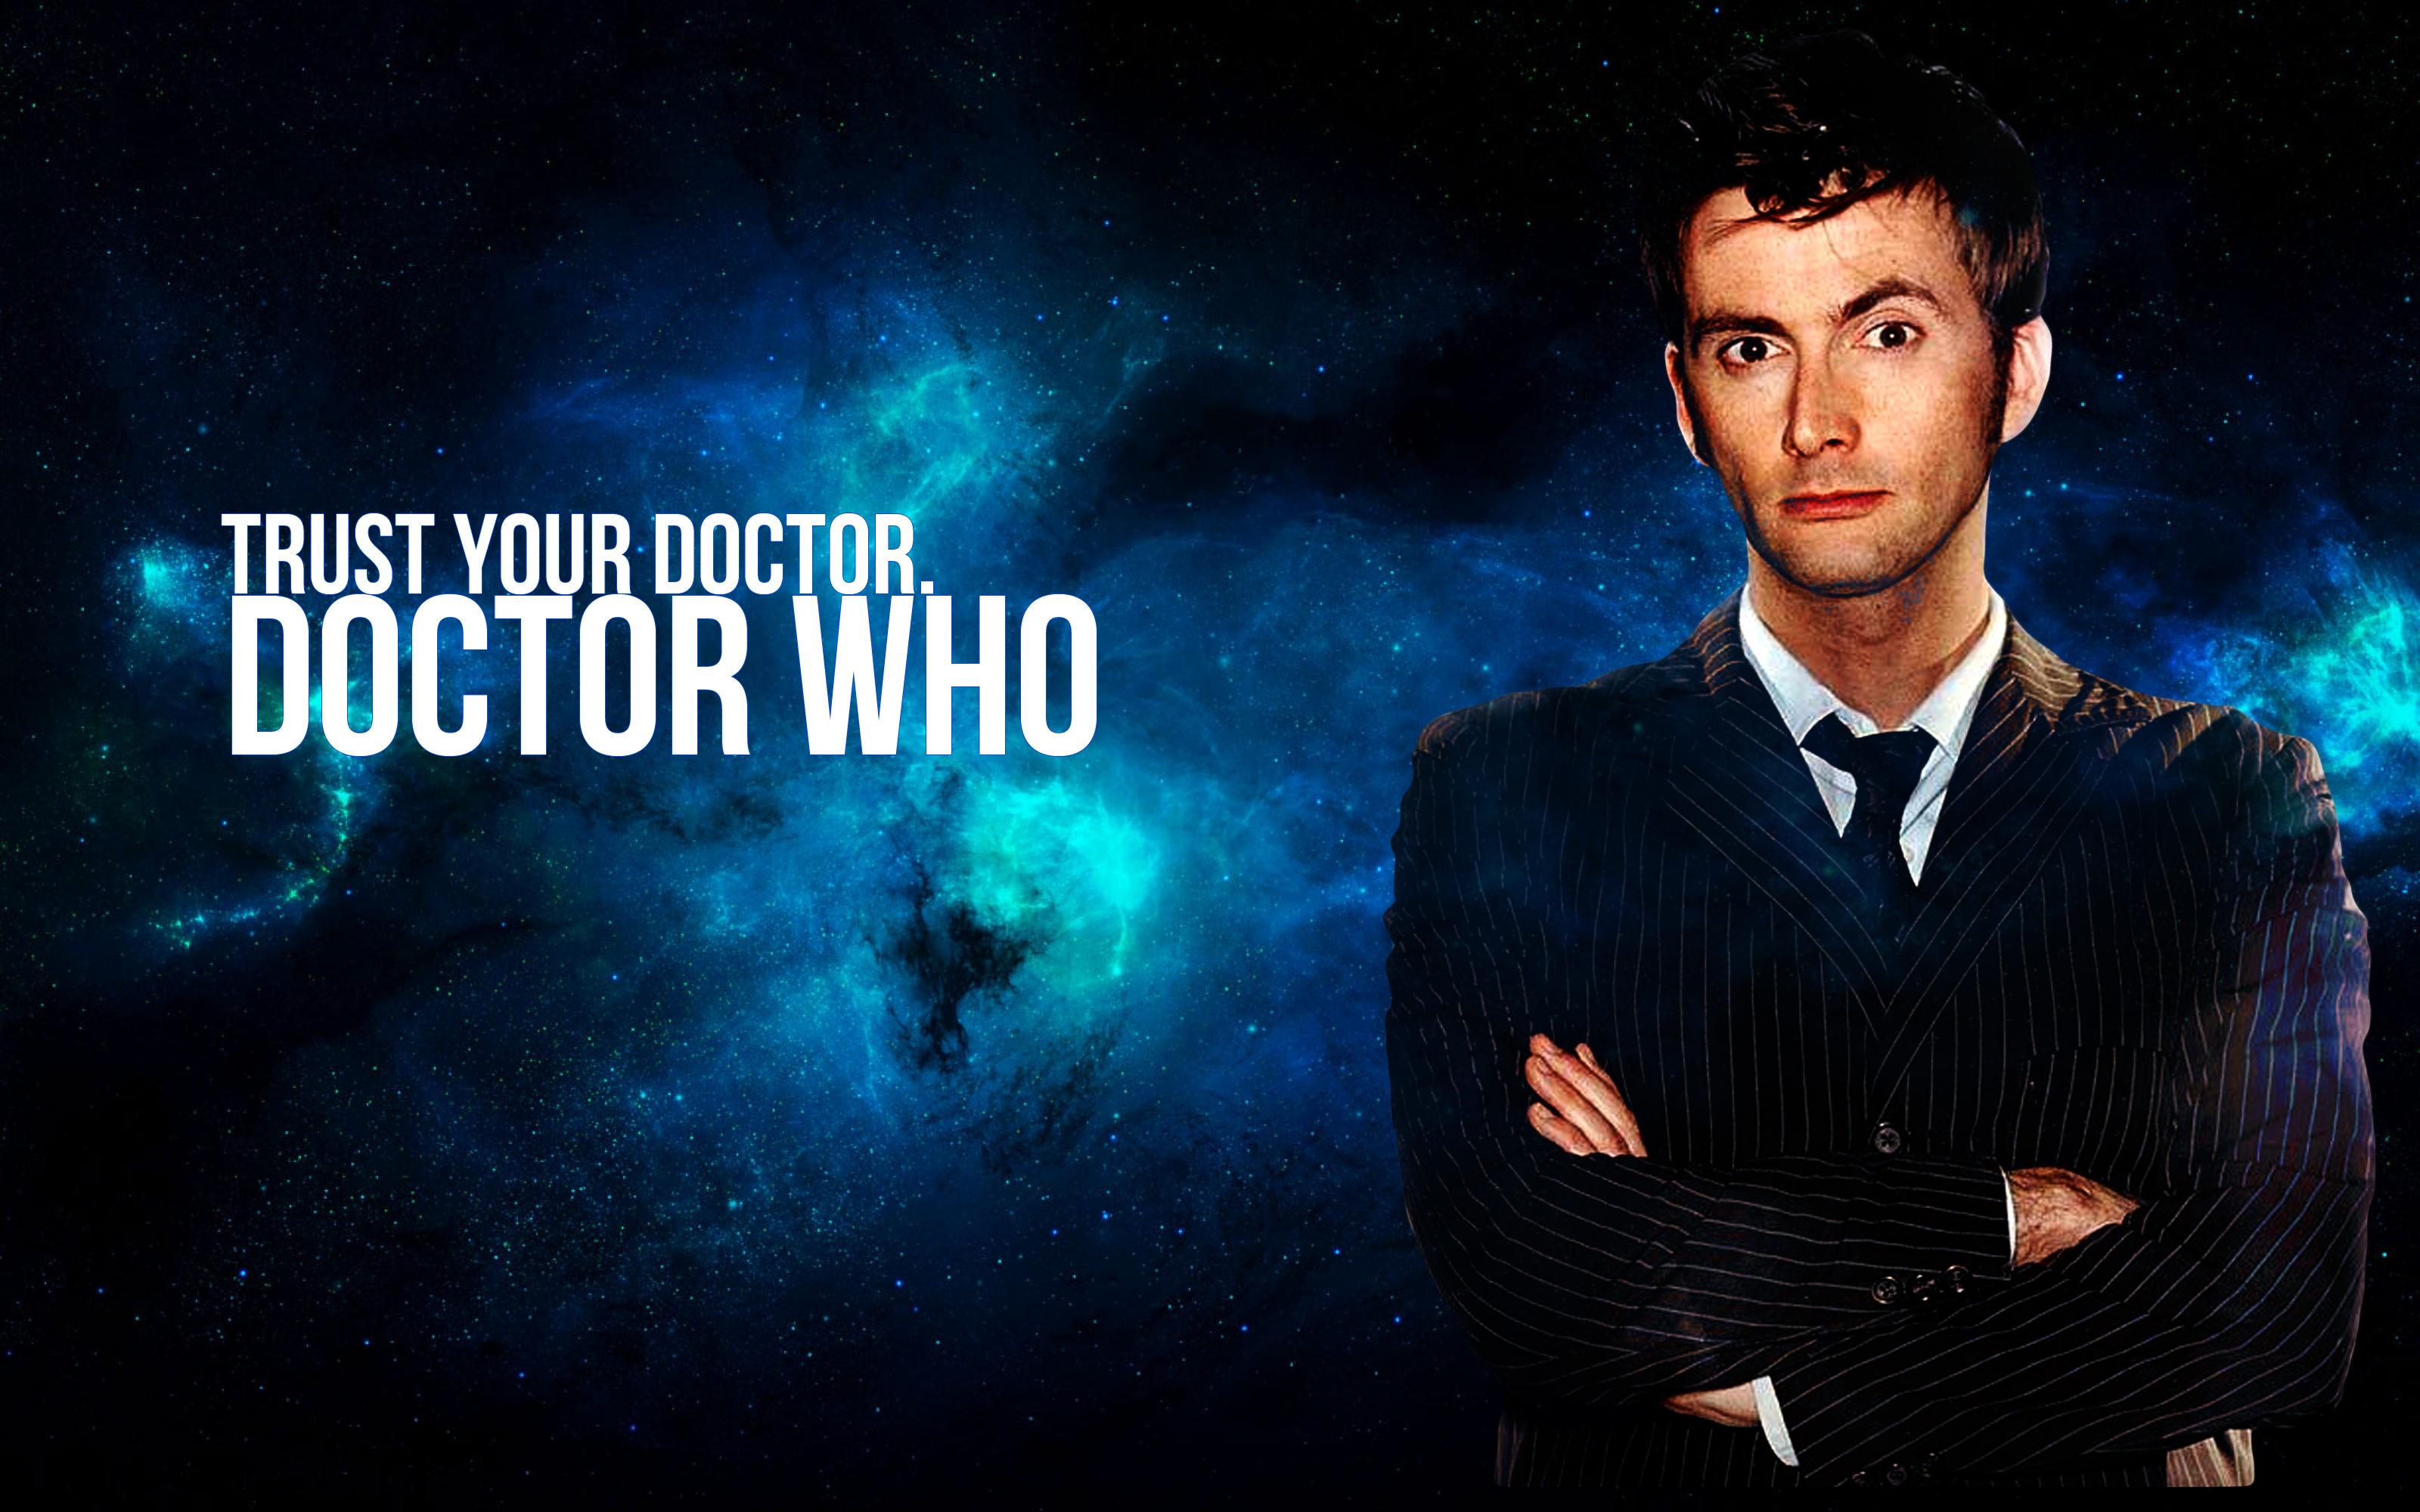 Doctor Who Wallpaper HD | Wallpapers, Backgrounds, Images, Art Photos.